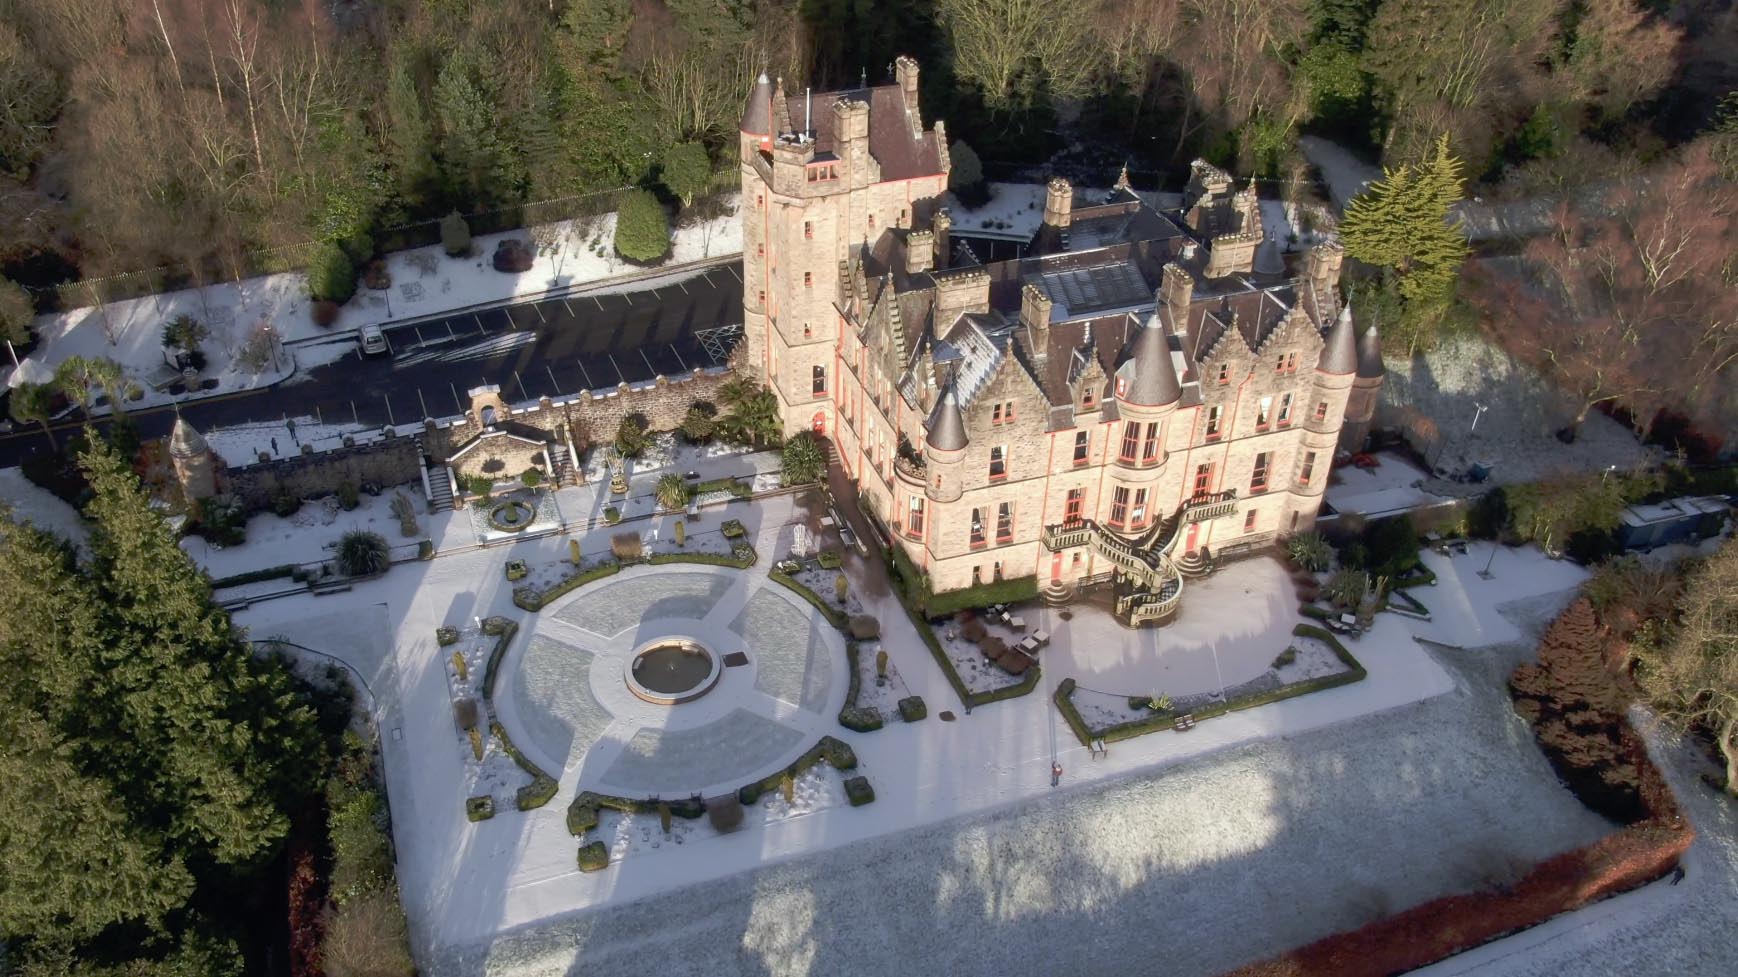 Video screenshot 4 of drone video of Belfast Castle in winter by Bout Yeh photography and video production Belfast and Northern Ireland